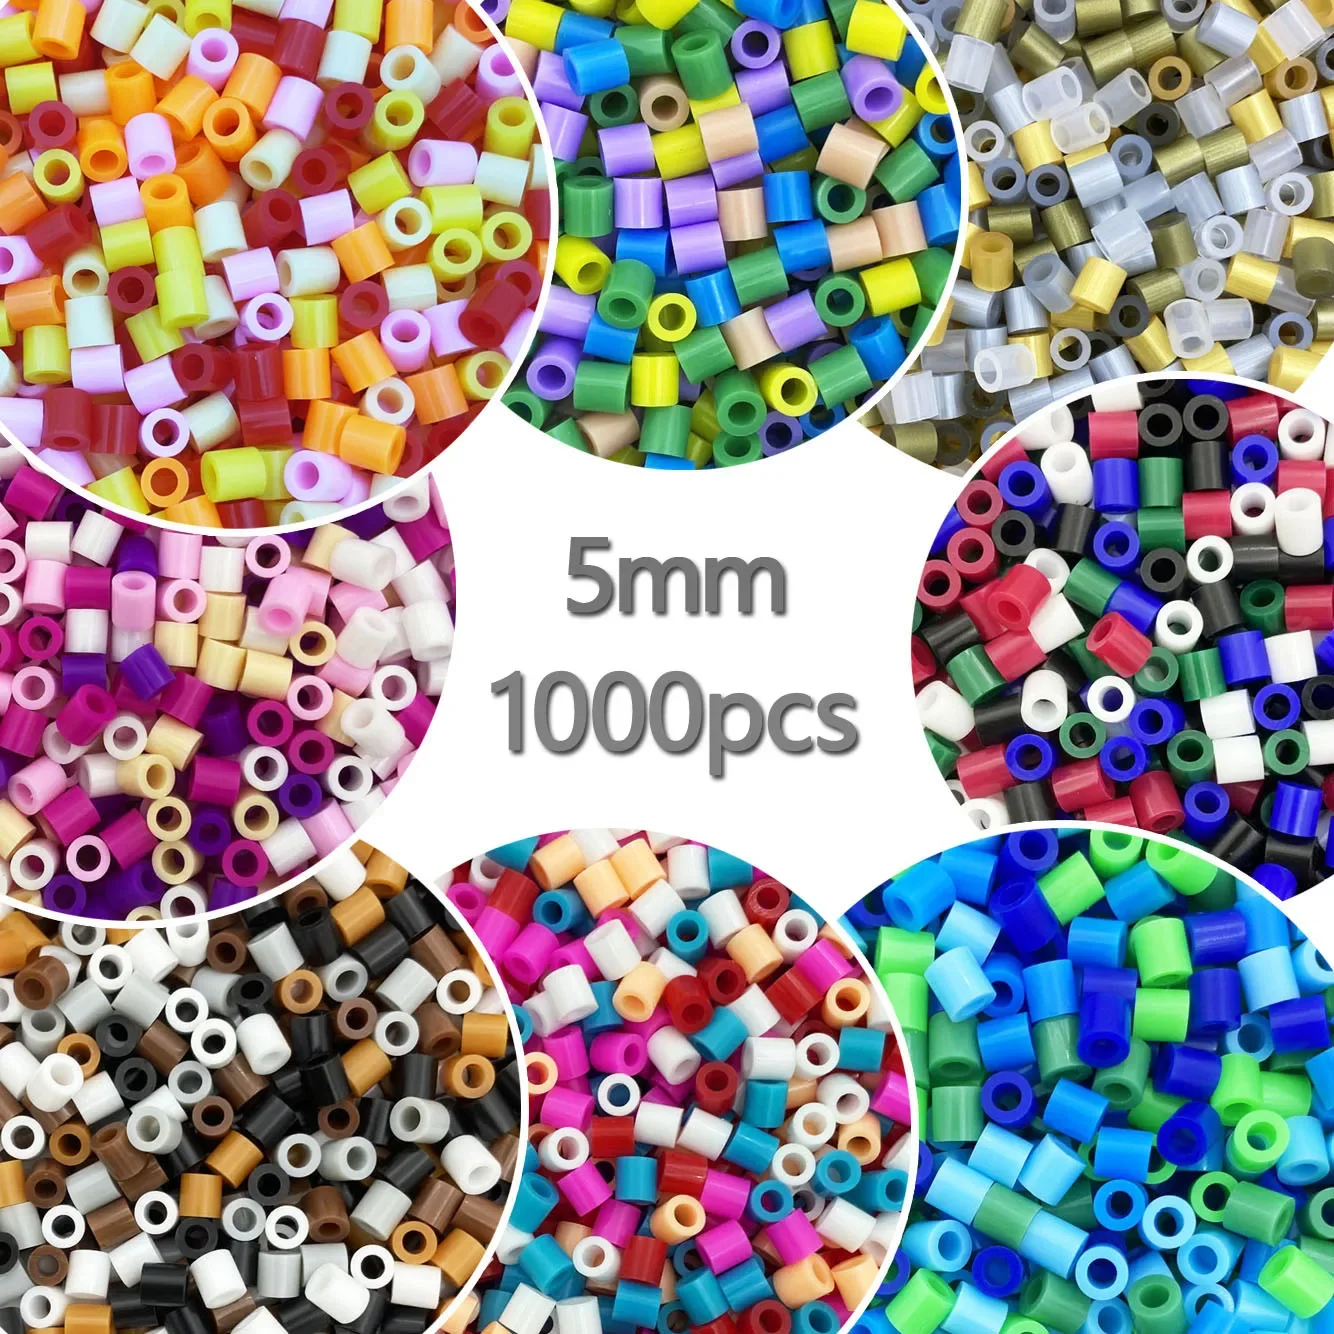 5MM 1000PCs  Puzzle Iron Beads for Kids Perler Hama Beads Diy High Quality Handmade Gift Toy Fuse Beads Craft Kit